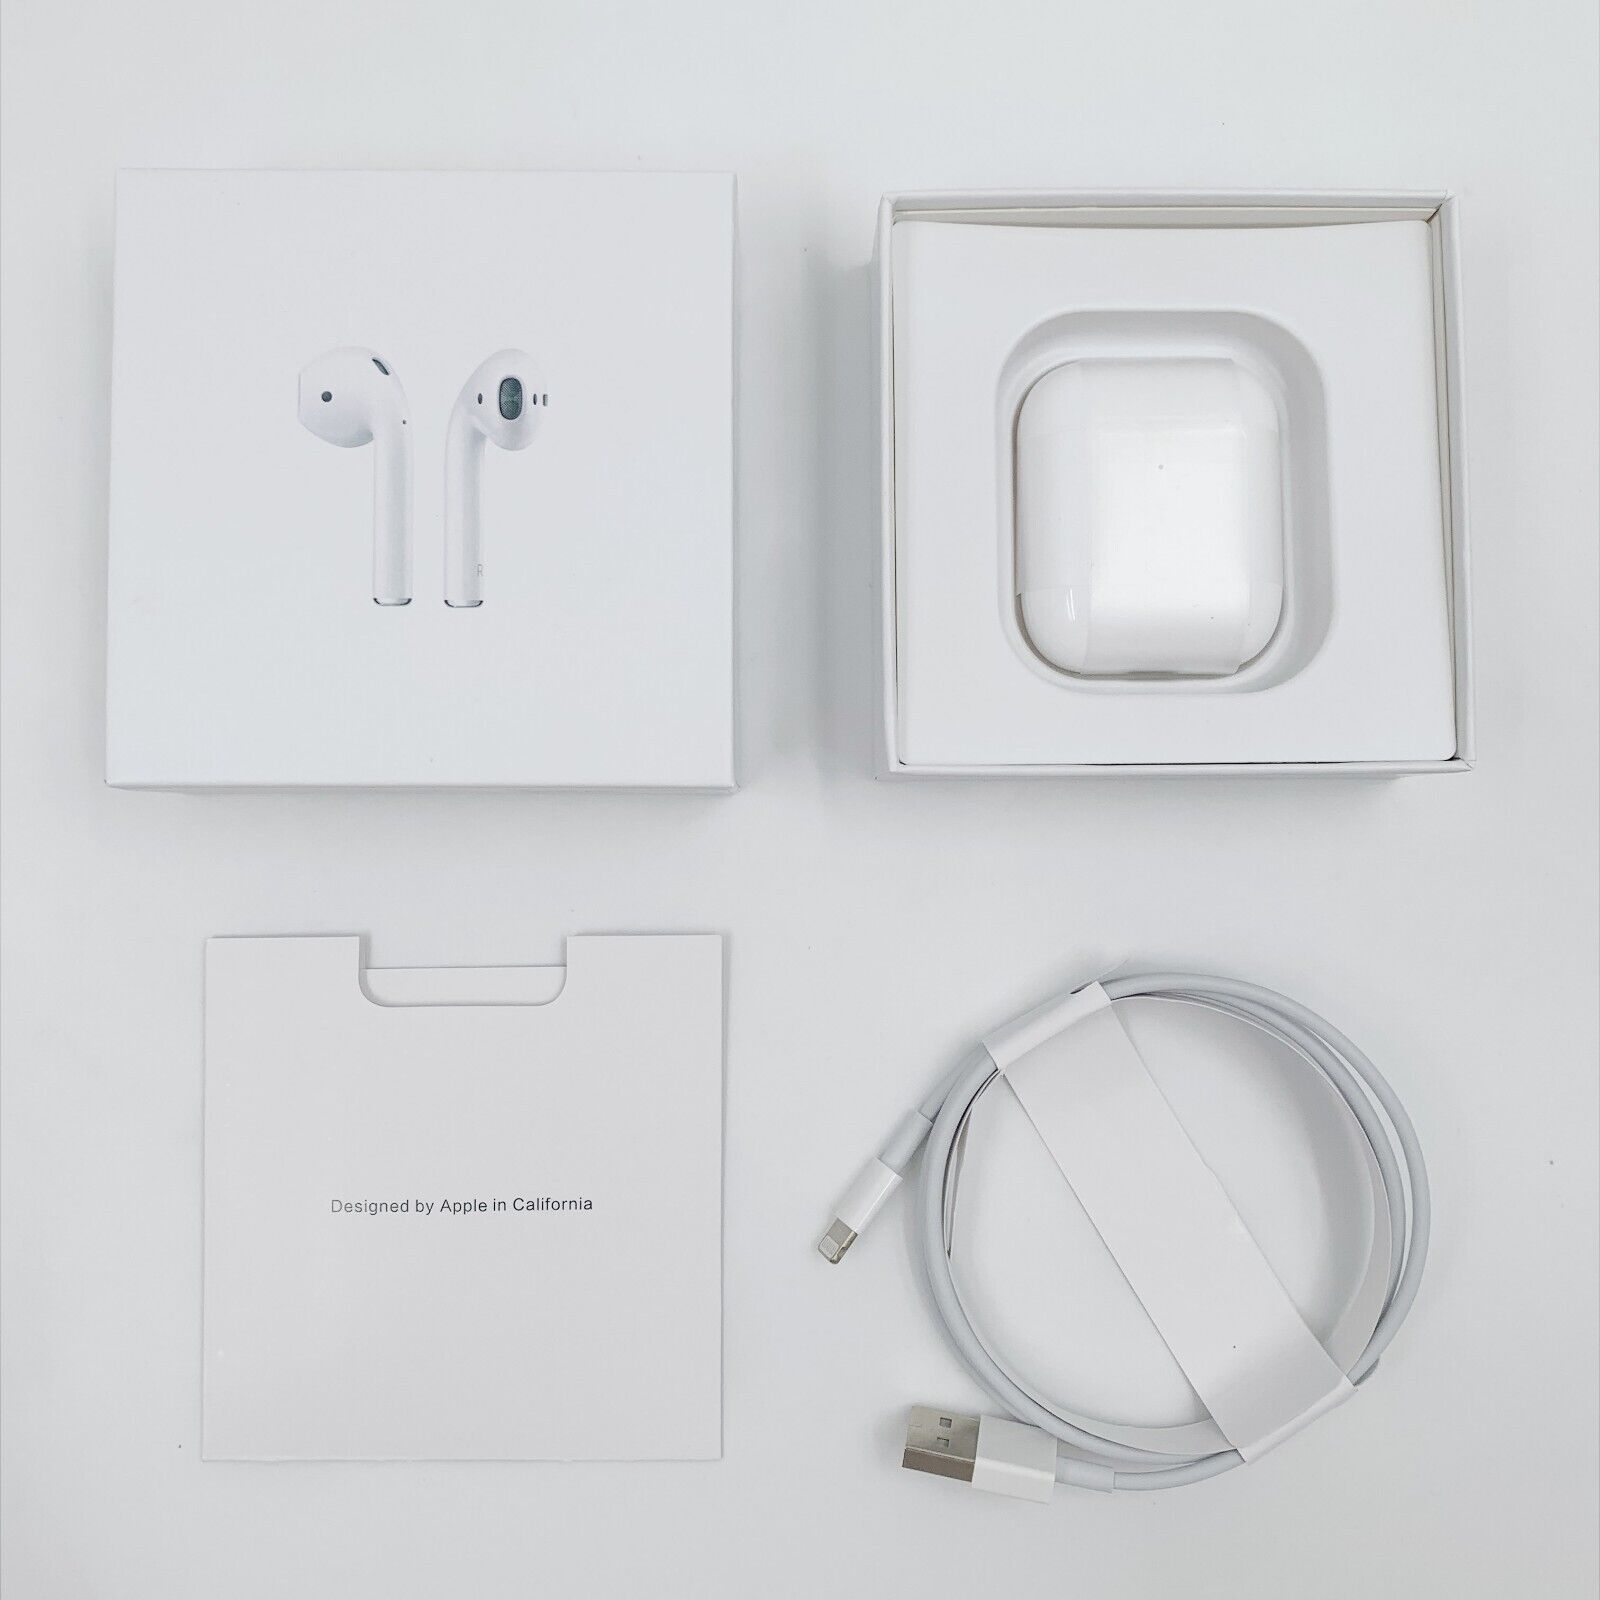 Apple AirPods 2nd Generation Bluetooth Earbuds Earphone White Charging Case New